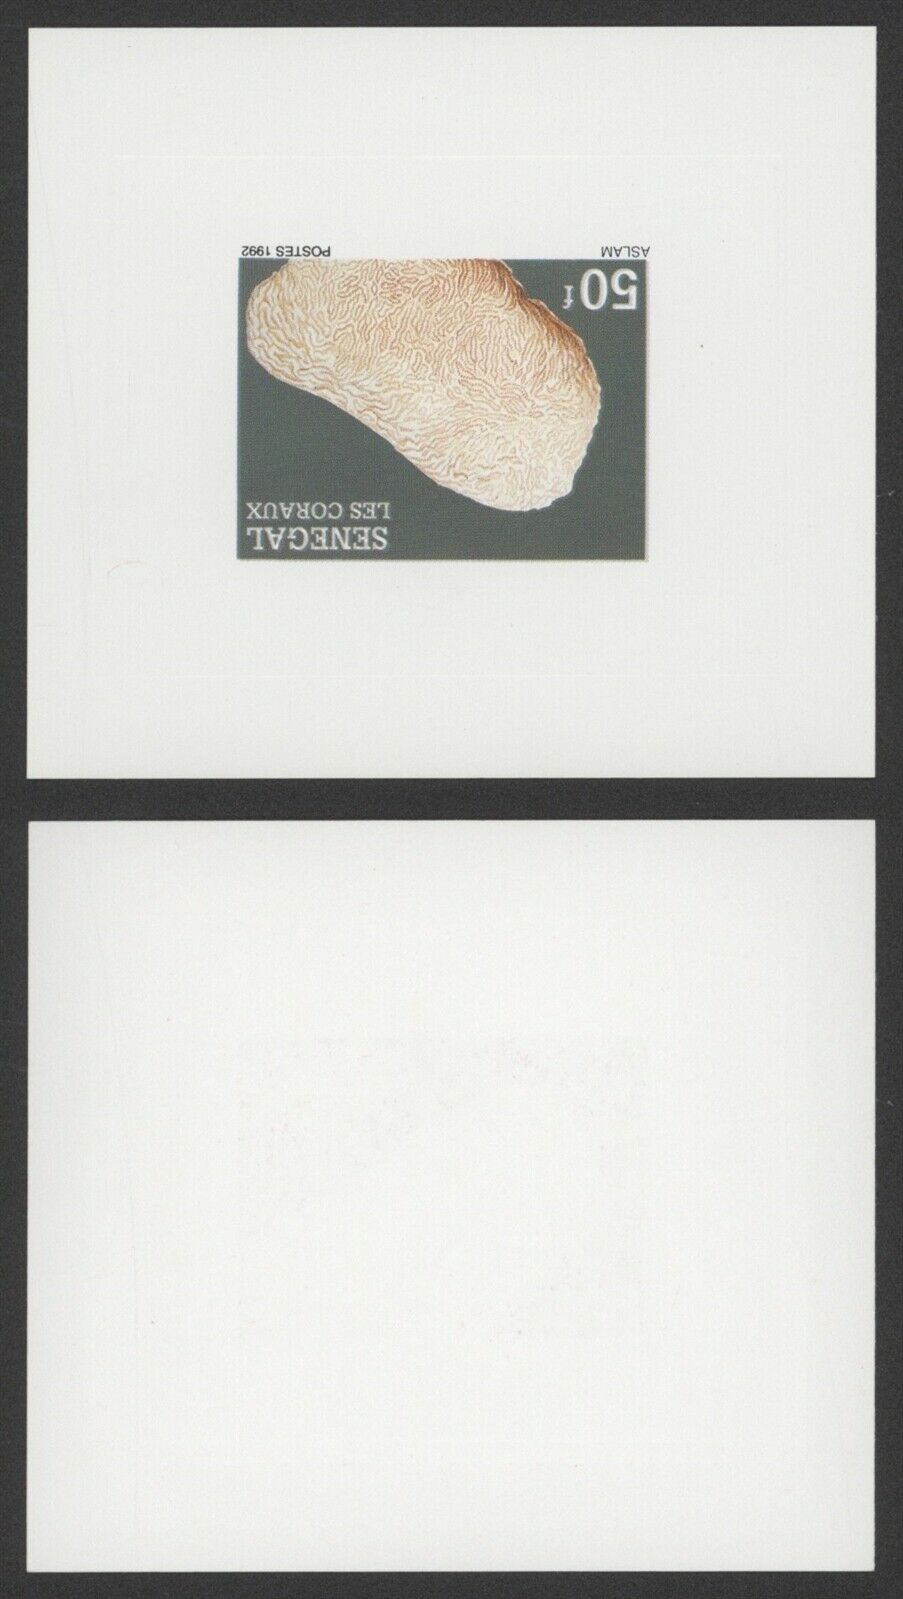 Senegal Coral Imperforate Miniature Sheet Proof Essay - Mint Stamp R764